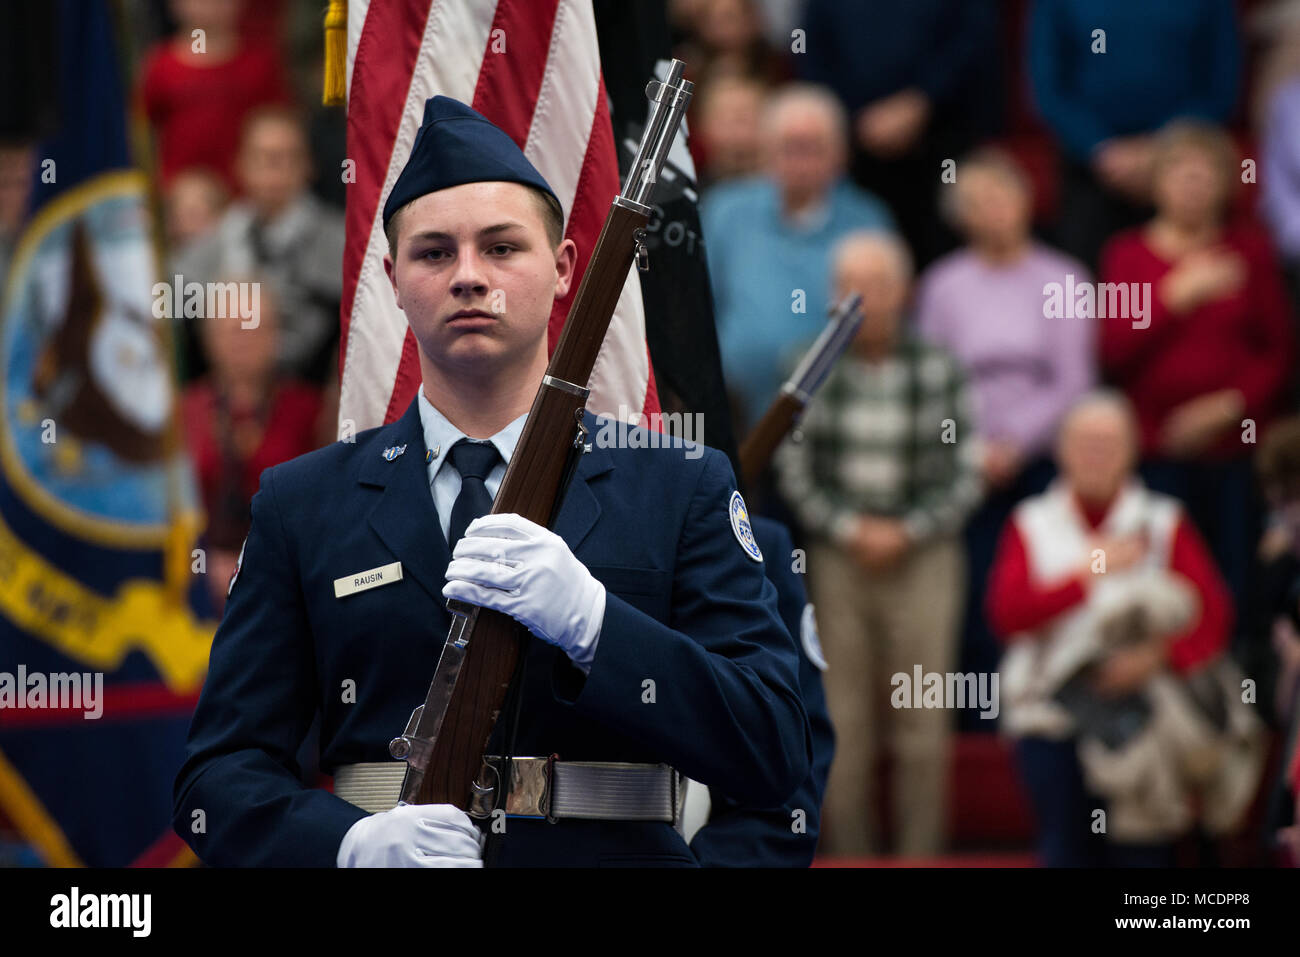 RANCHO CORDOVA, Calif. (Feb. 22, 2018) The Cordova High School Air Force Junior Reserve Officer Training Corps Color Guard, led by Cadet 2nd Lt. Jaeden Gaw, presents the colors before a U.S. Navy Band concert at Cordova High School in Rancho Cordova, California. The Navy Band performed in 12 states during its 21-city, 5,000-mile tour, connecting communities across the nation to their Navy. (U.S. Navy photo by Chief Musician Adam Grimm/Released) Stock Photo